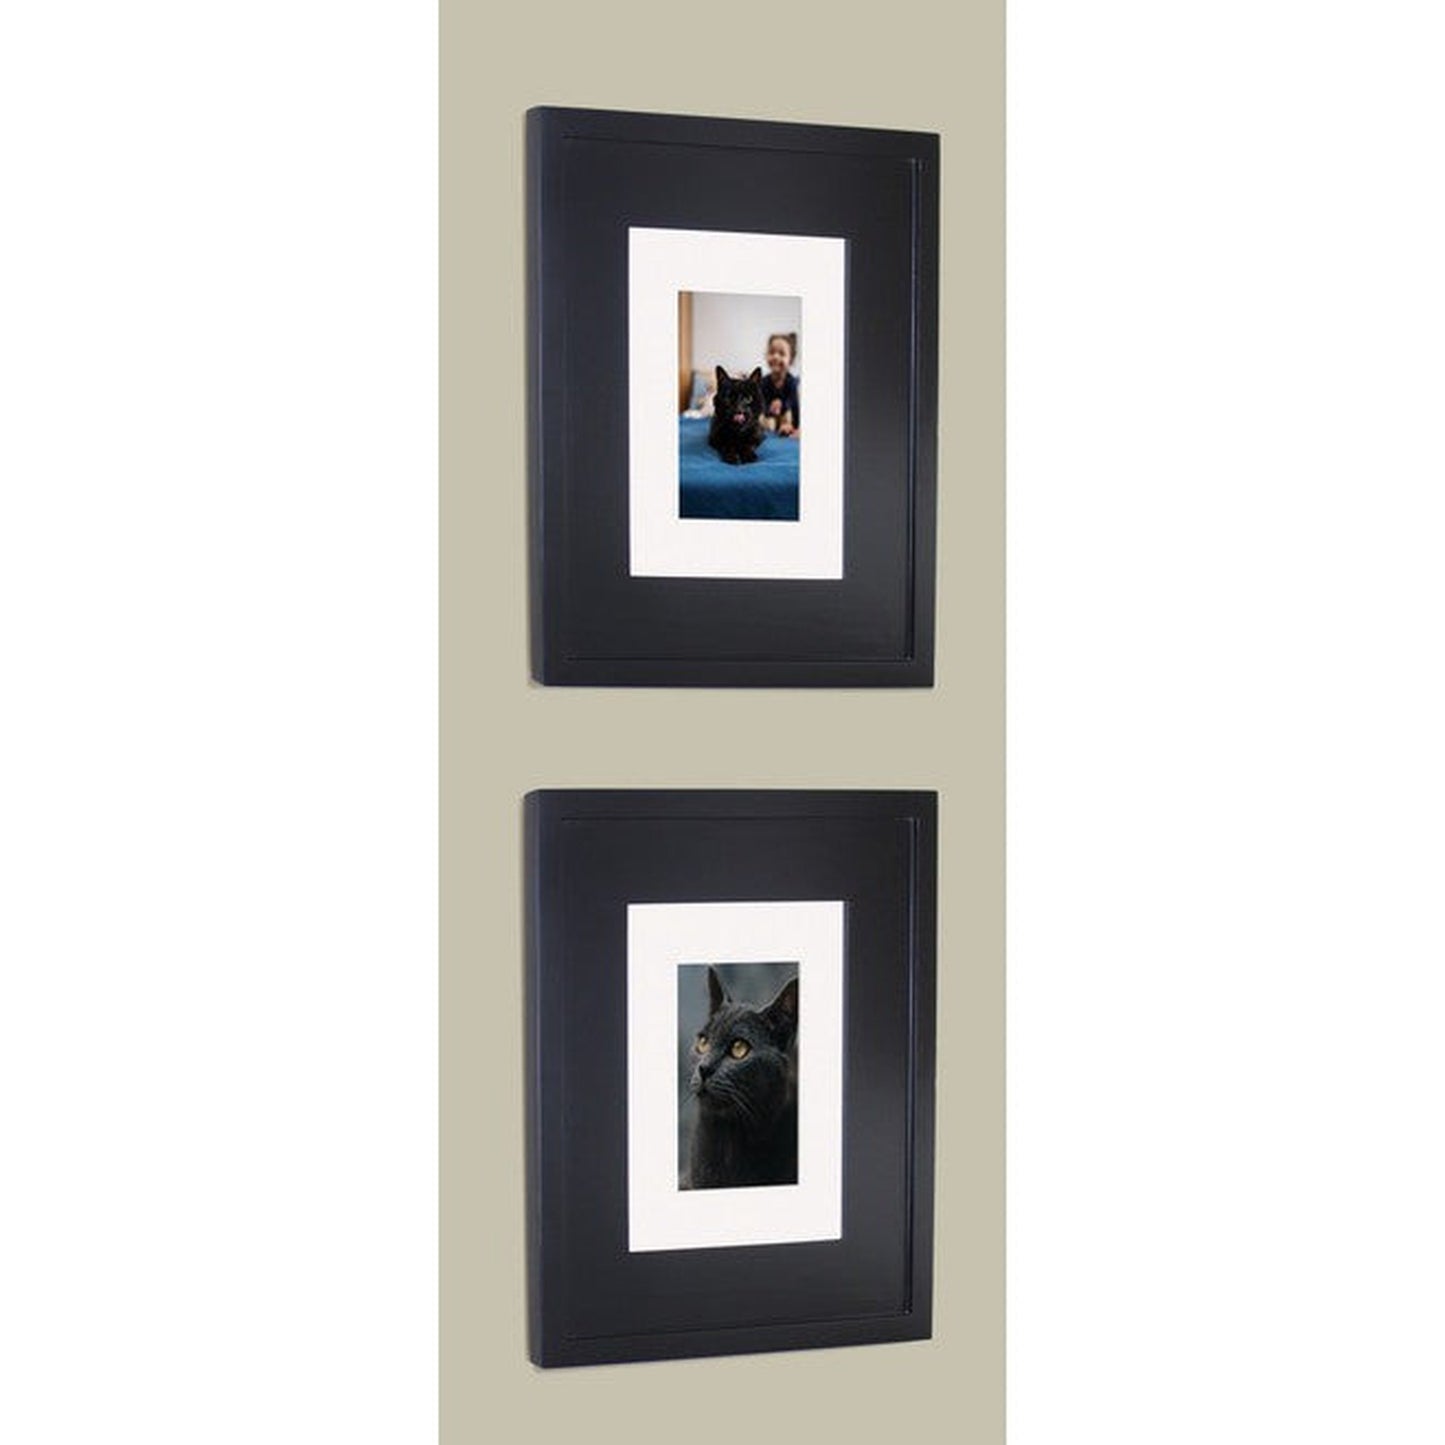 Fox Hollow Furnishings 11" x 14" Black Compact Portrait Standard 4" Depth Recessed Picture Frame Medicine Cabinet With Ivory Matting